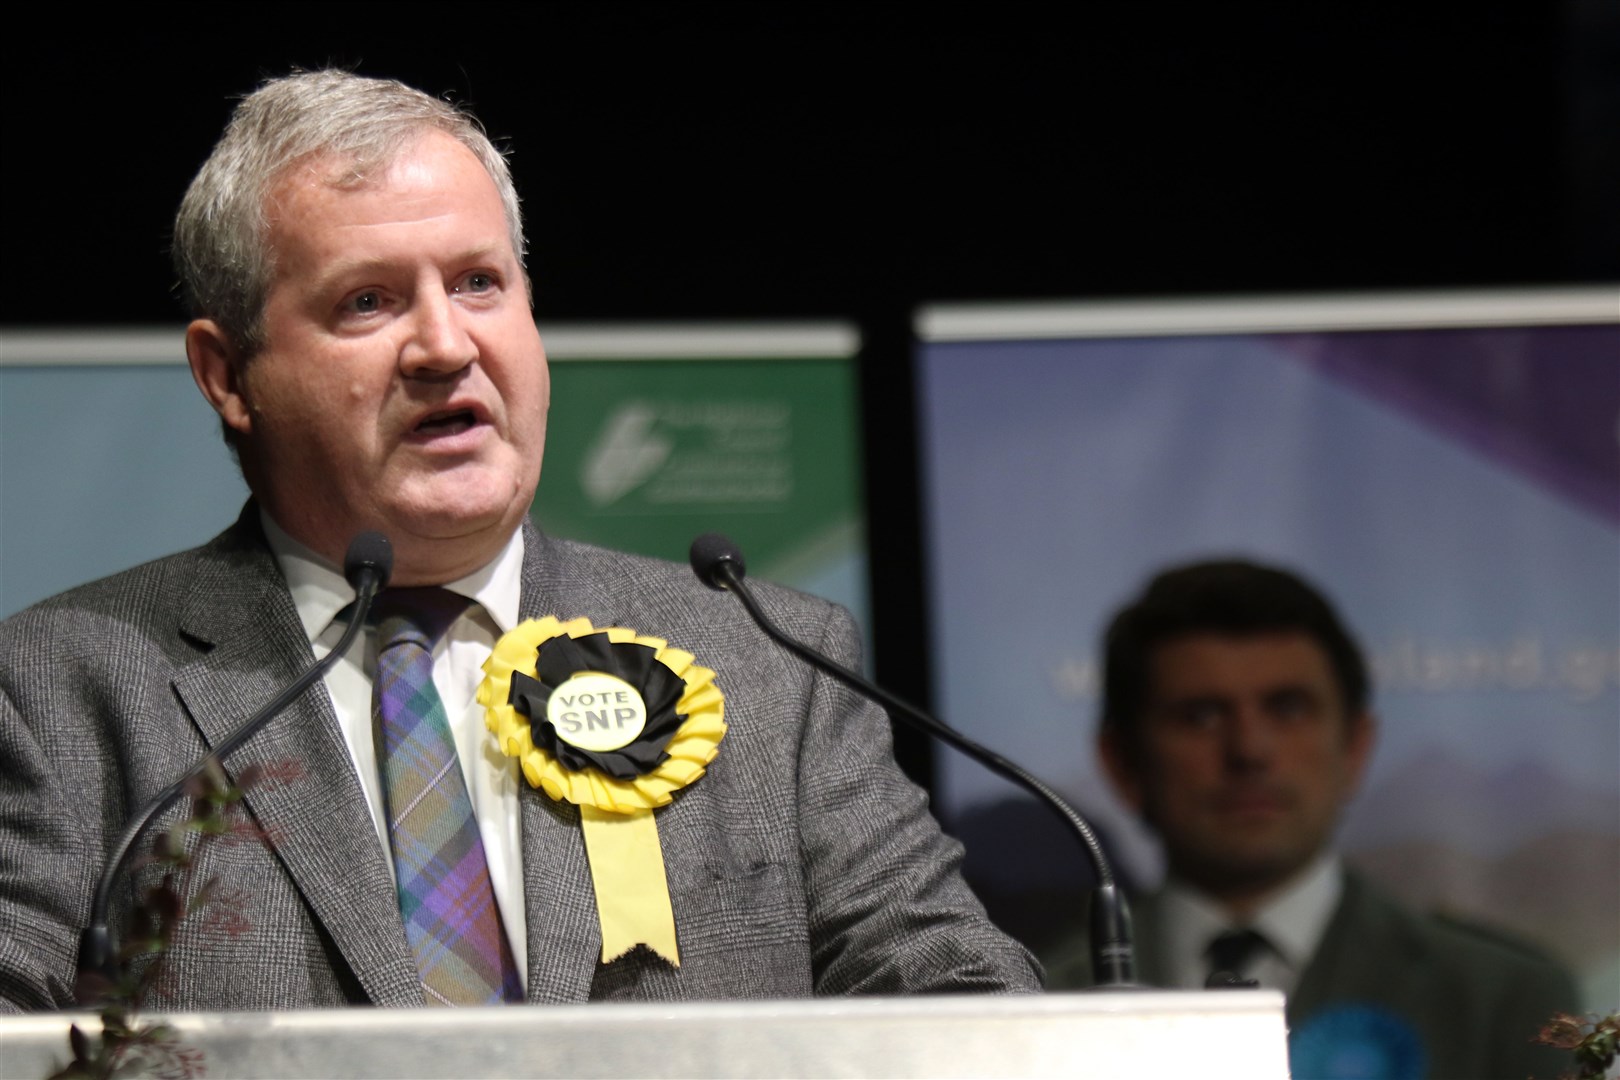 Ian Blackford: 'We can ill afford to lose people from the Highlands and this saddens me greatly.'